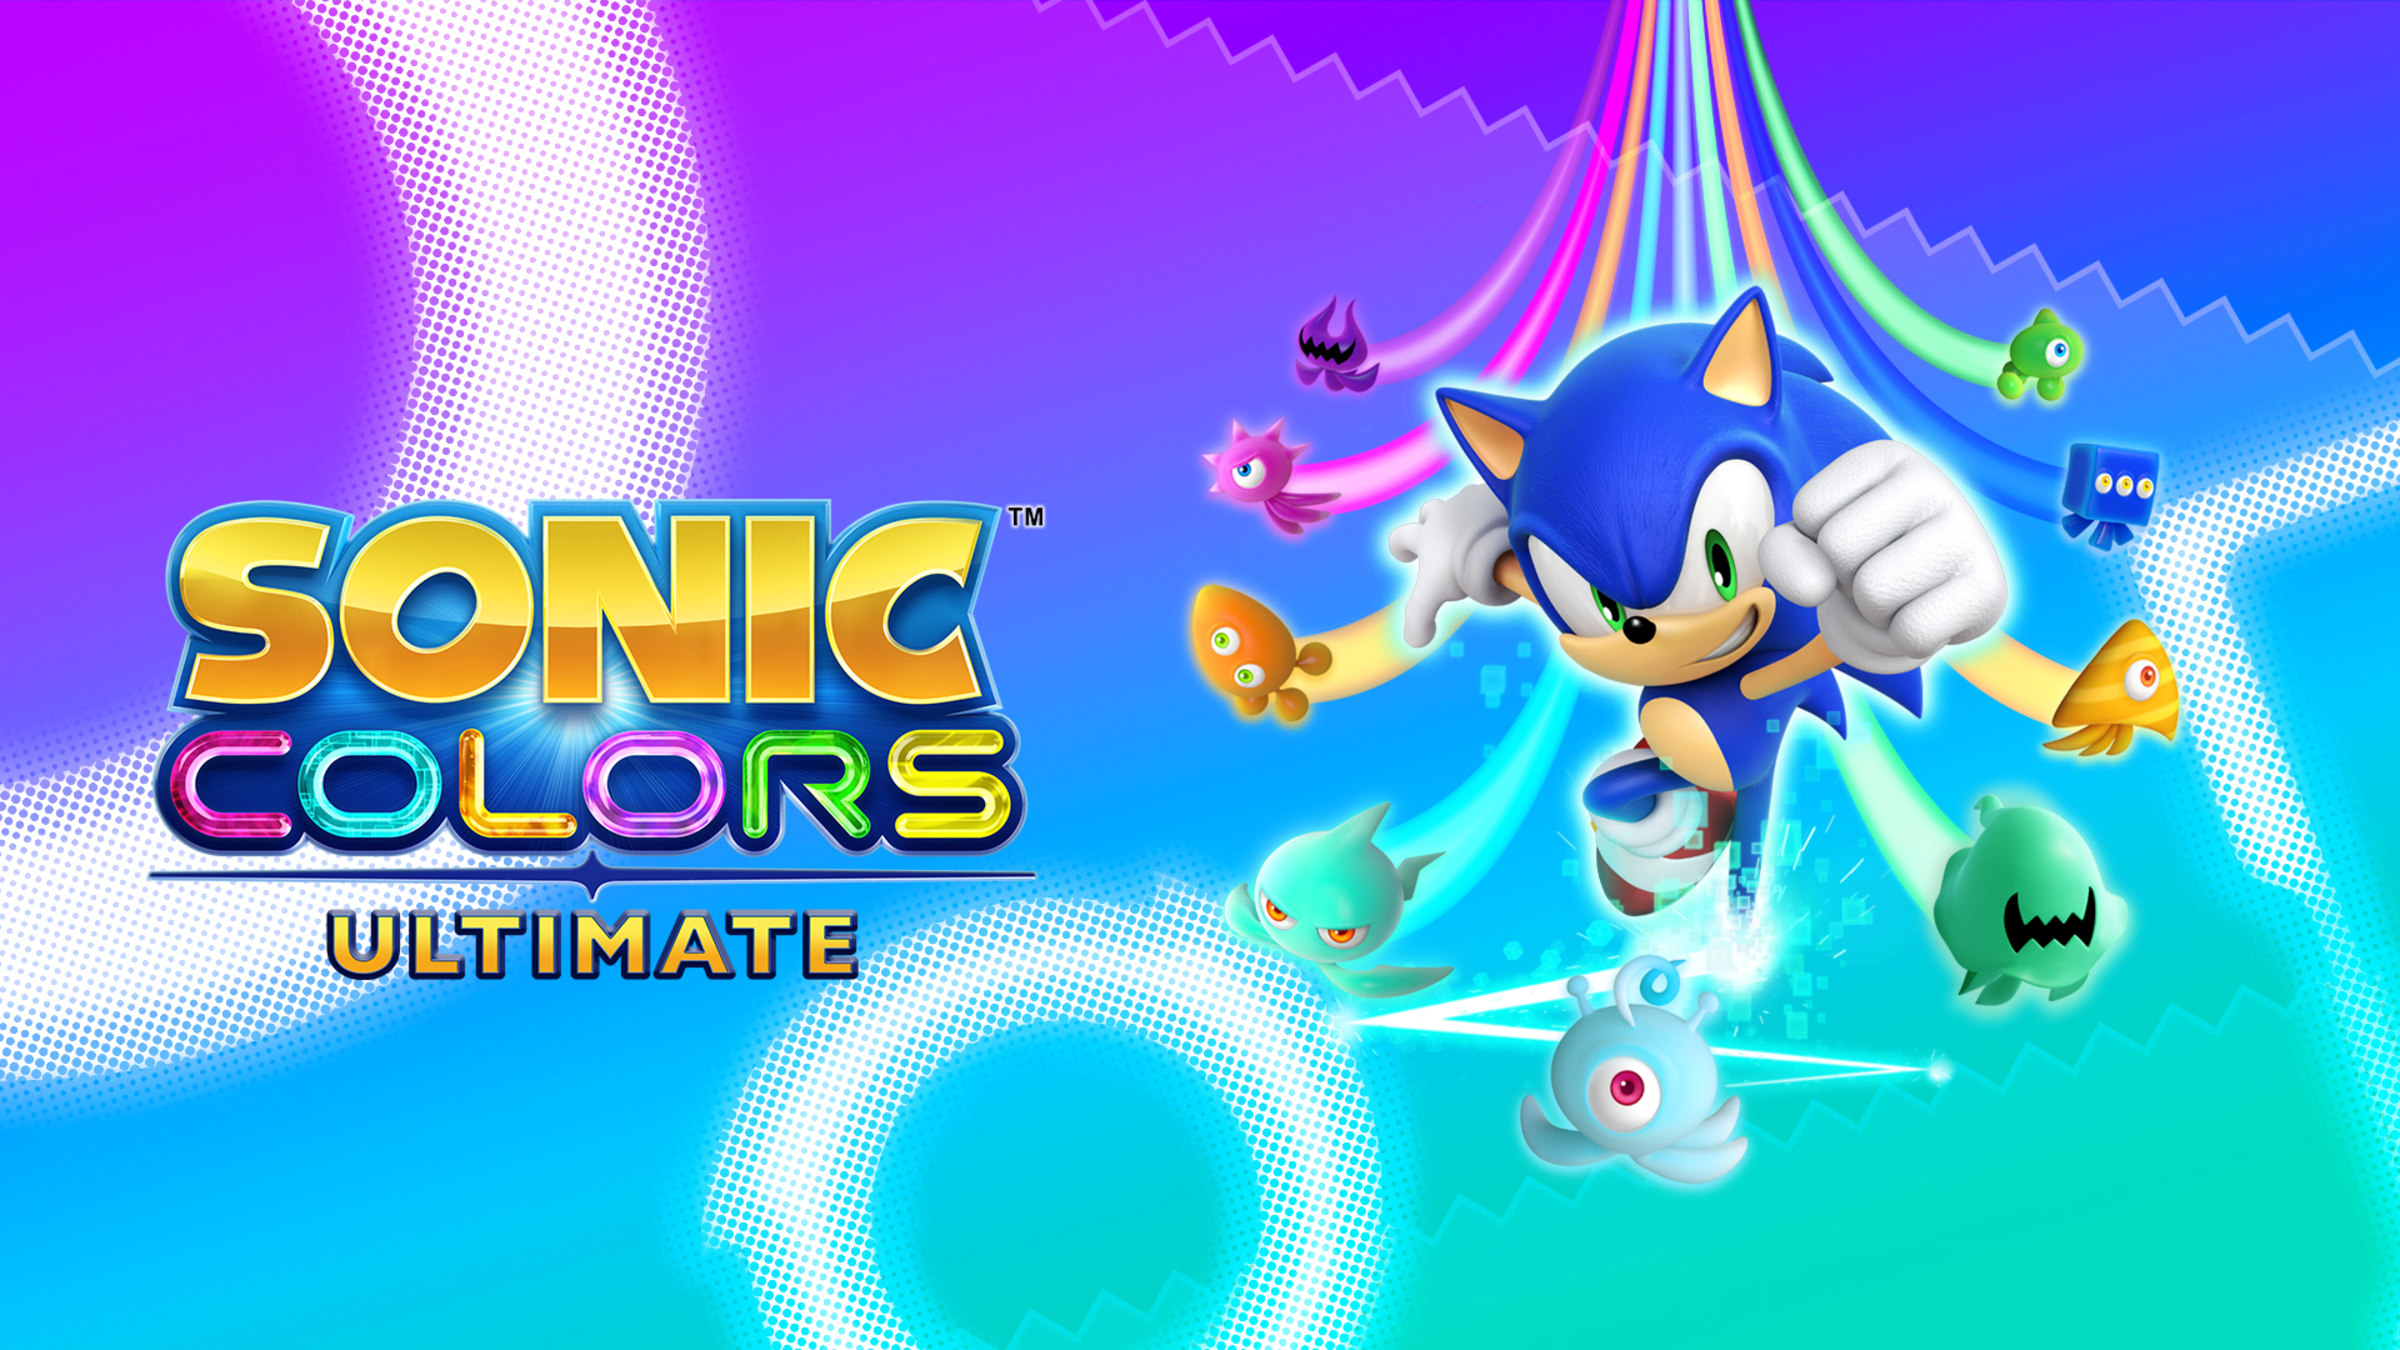 Sonic Colors: Ultimate for Switch - Nintendo Official Site